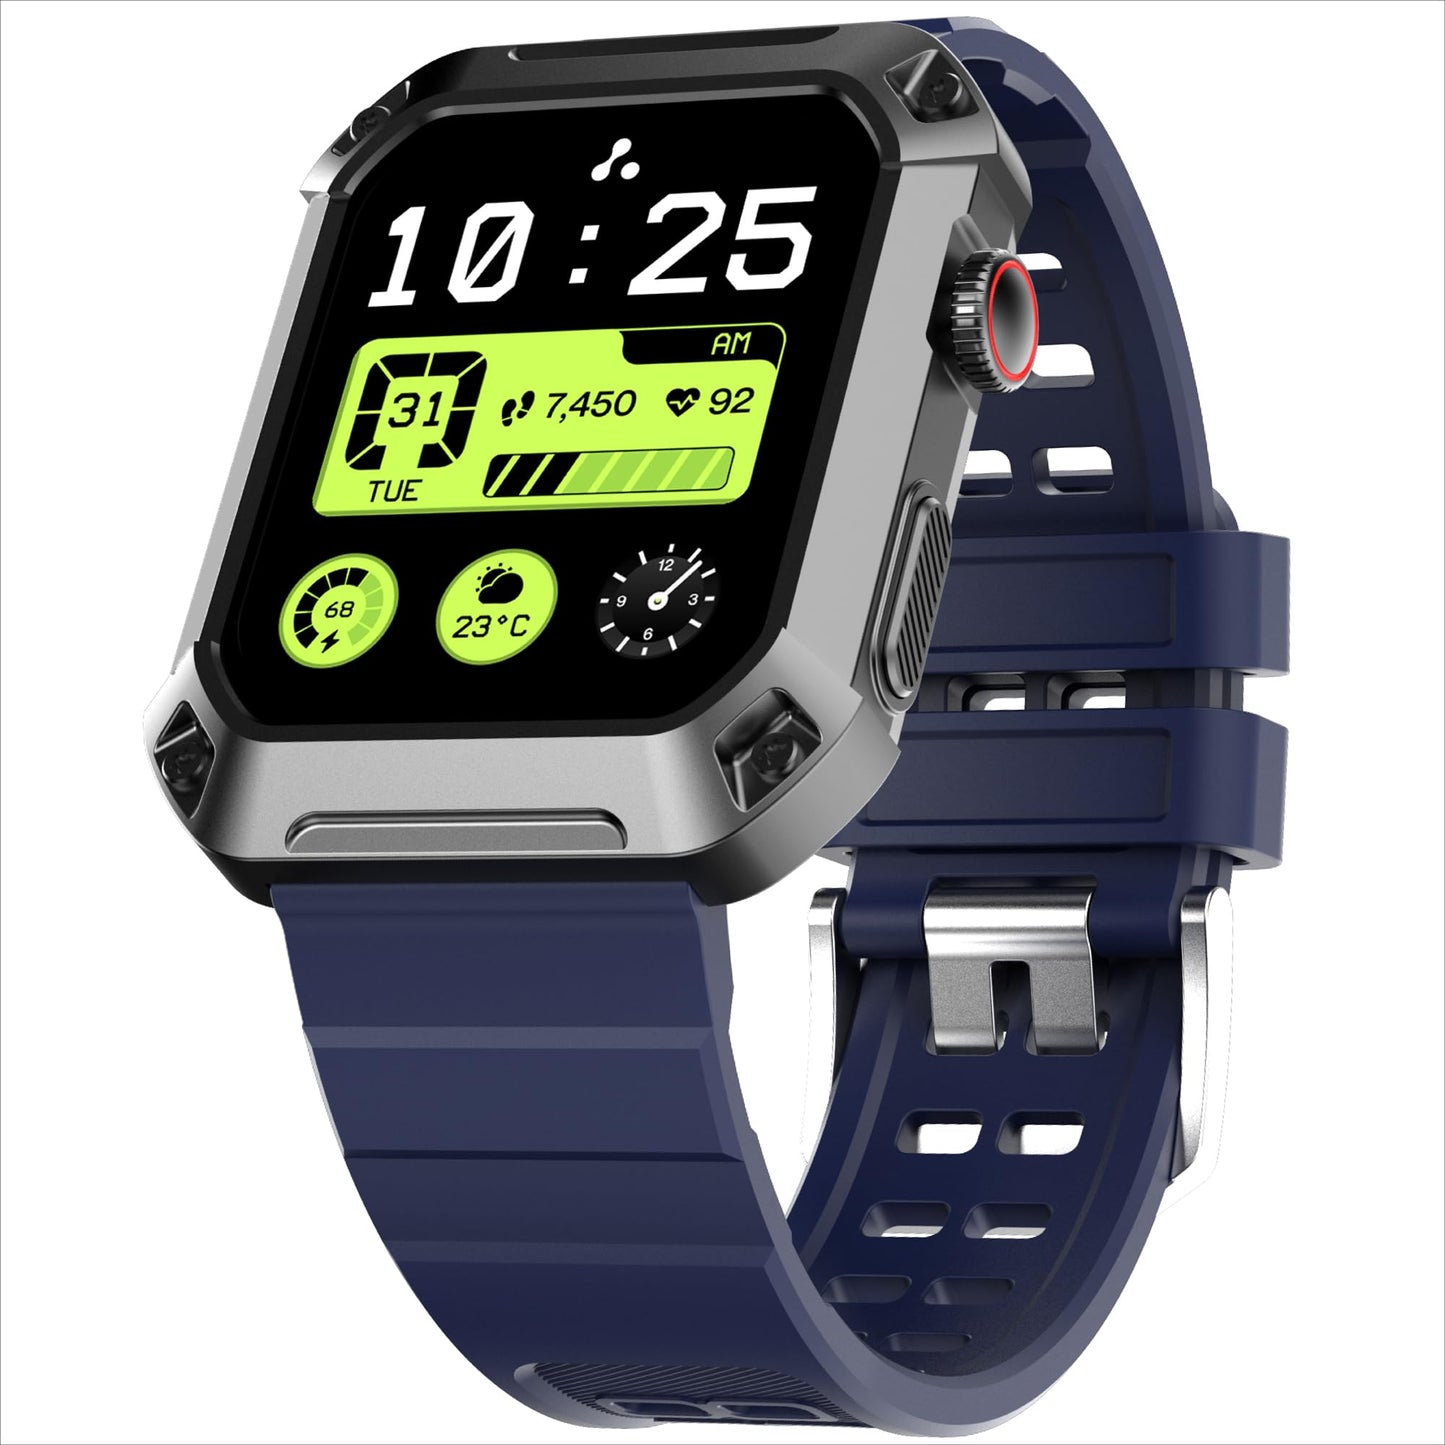 Ambrane 1.85" Uni Pair BT Calling Smartwatch, Rugged & Sporty Metal Body, 10 Days Battery, 500 NITS, 100+ Sports Mode with IP68, Sp02 Tracking, 100+ Watch Faces (Stud, Blue)